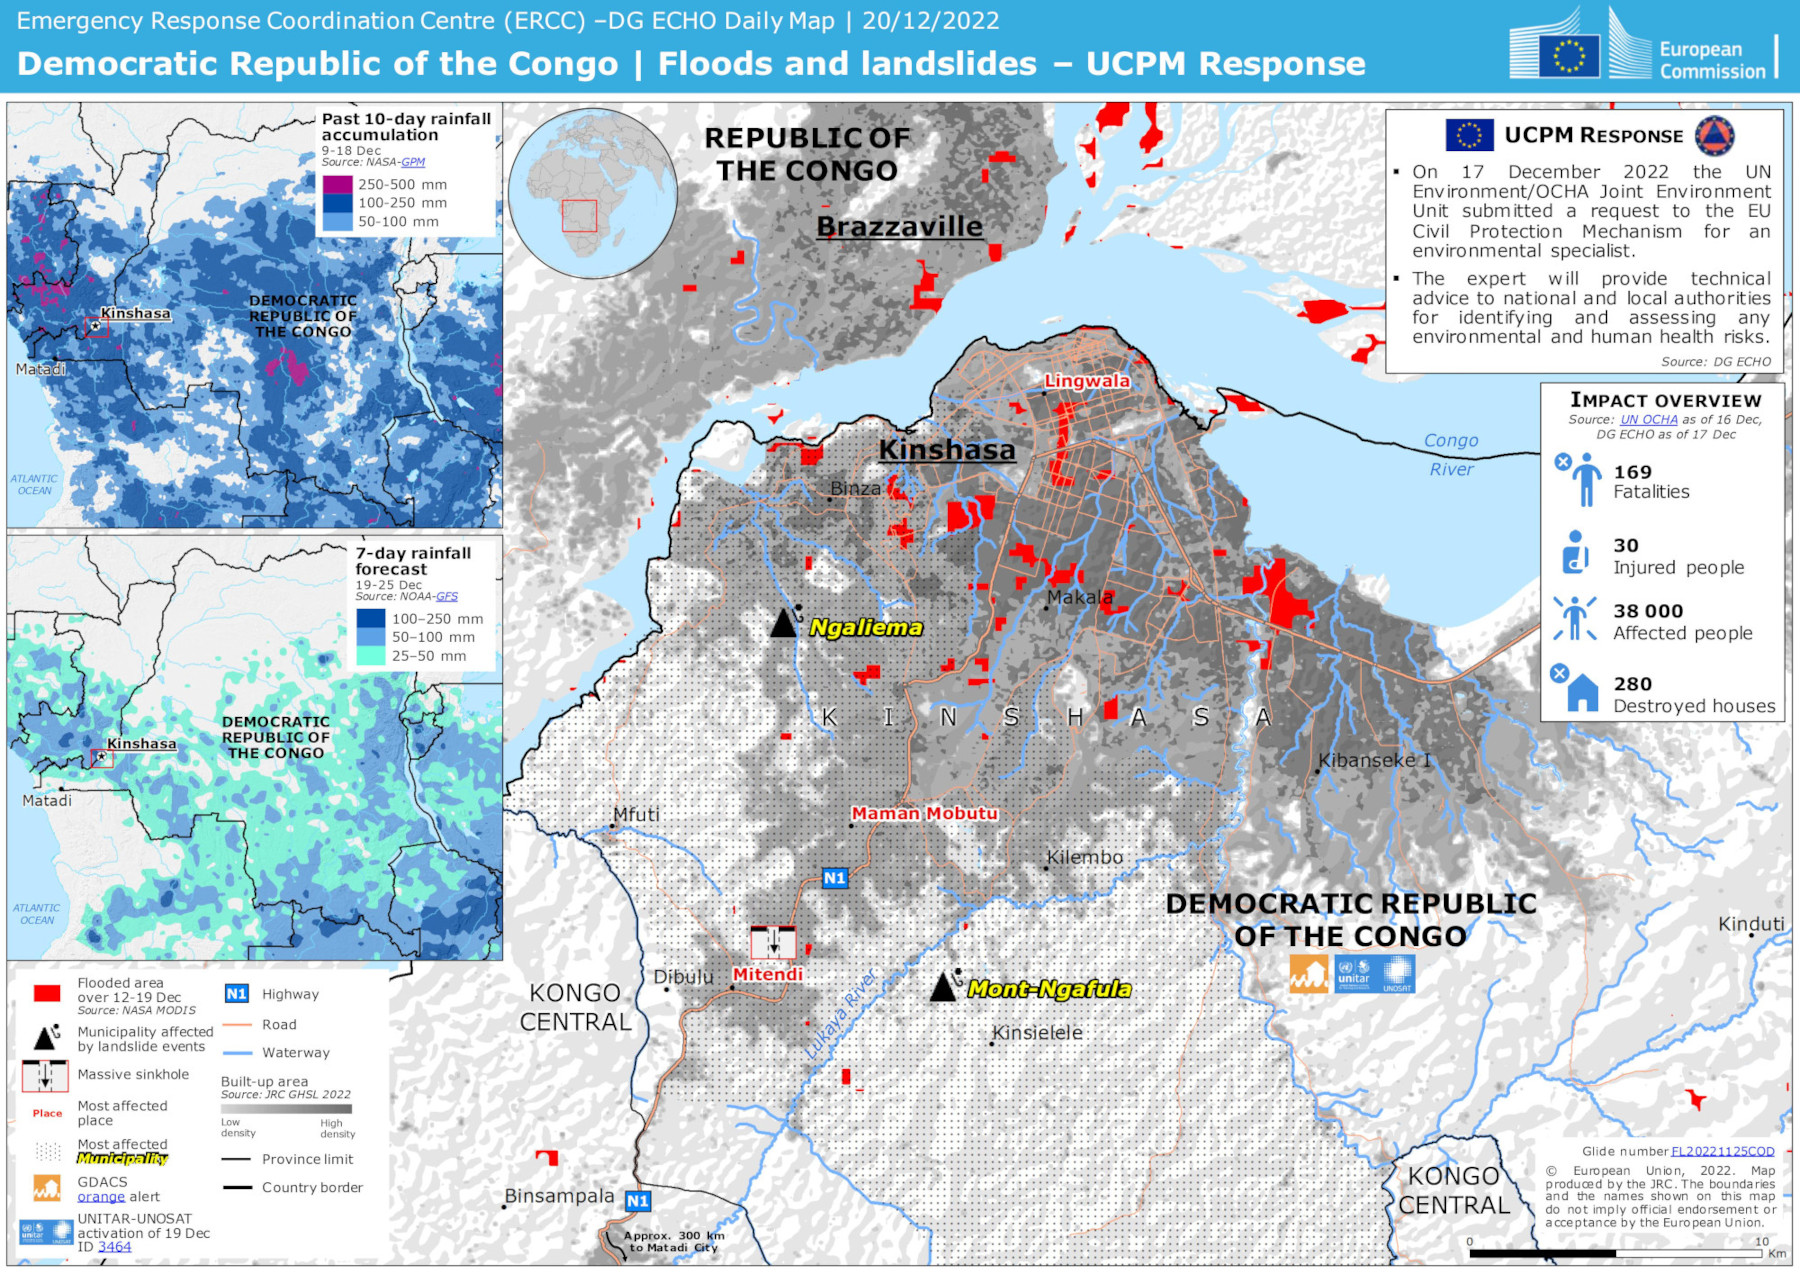 Image 2: Emergency Response Coordination Centre (ERCC) –DG ECHO Daily Map, 20 December 2022: Democratic Republic of the Congo Floods and landslides – UCPM Response